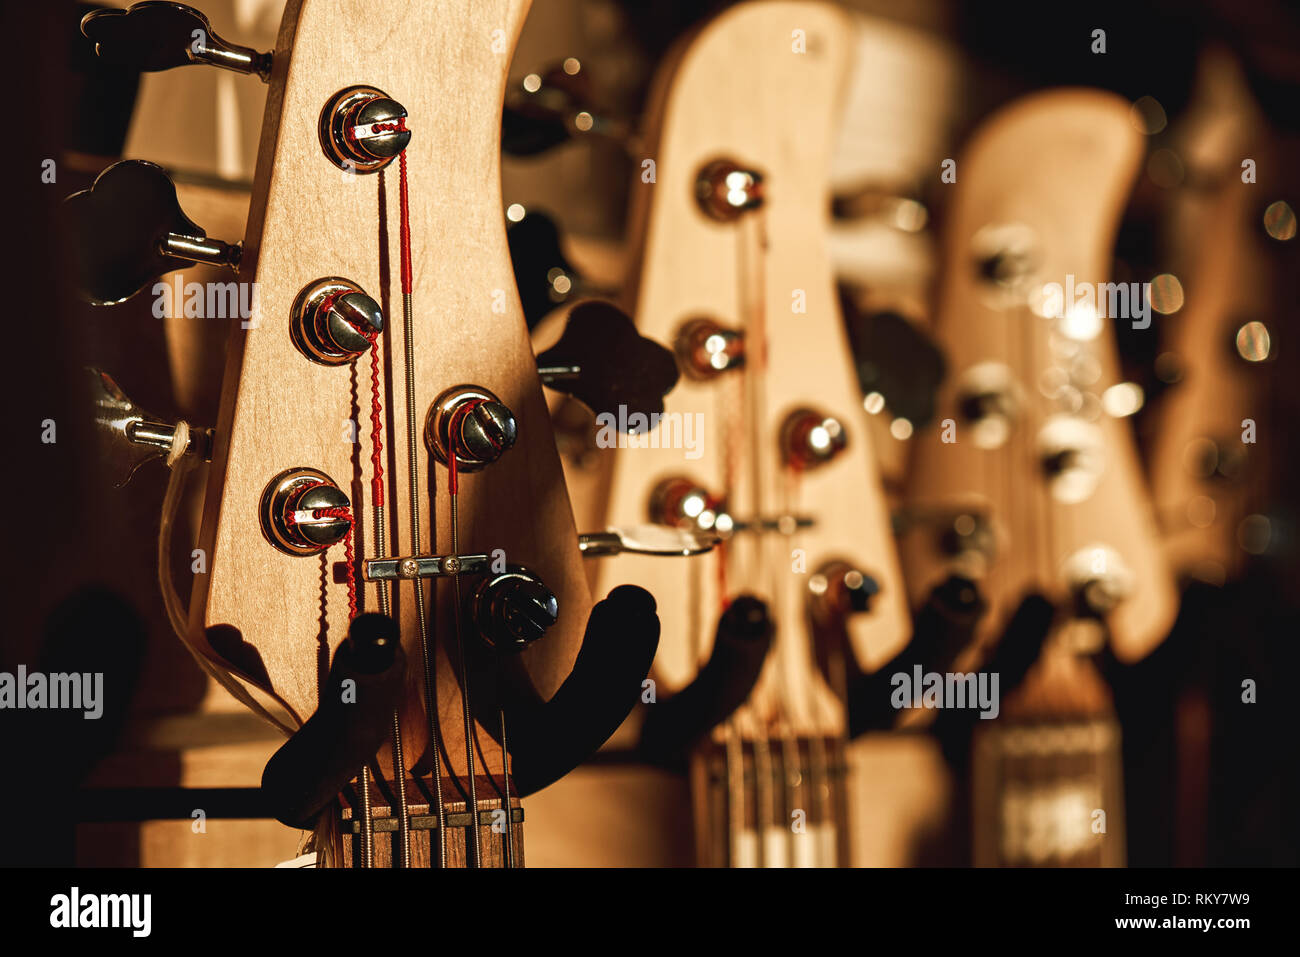 Uppermost part of the guitar. Close view of several acoustic guitar headstocks with tuning keys for ajusting guitar strings. Music shop. Musical instrument. Live music Stock Photo